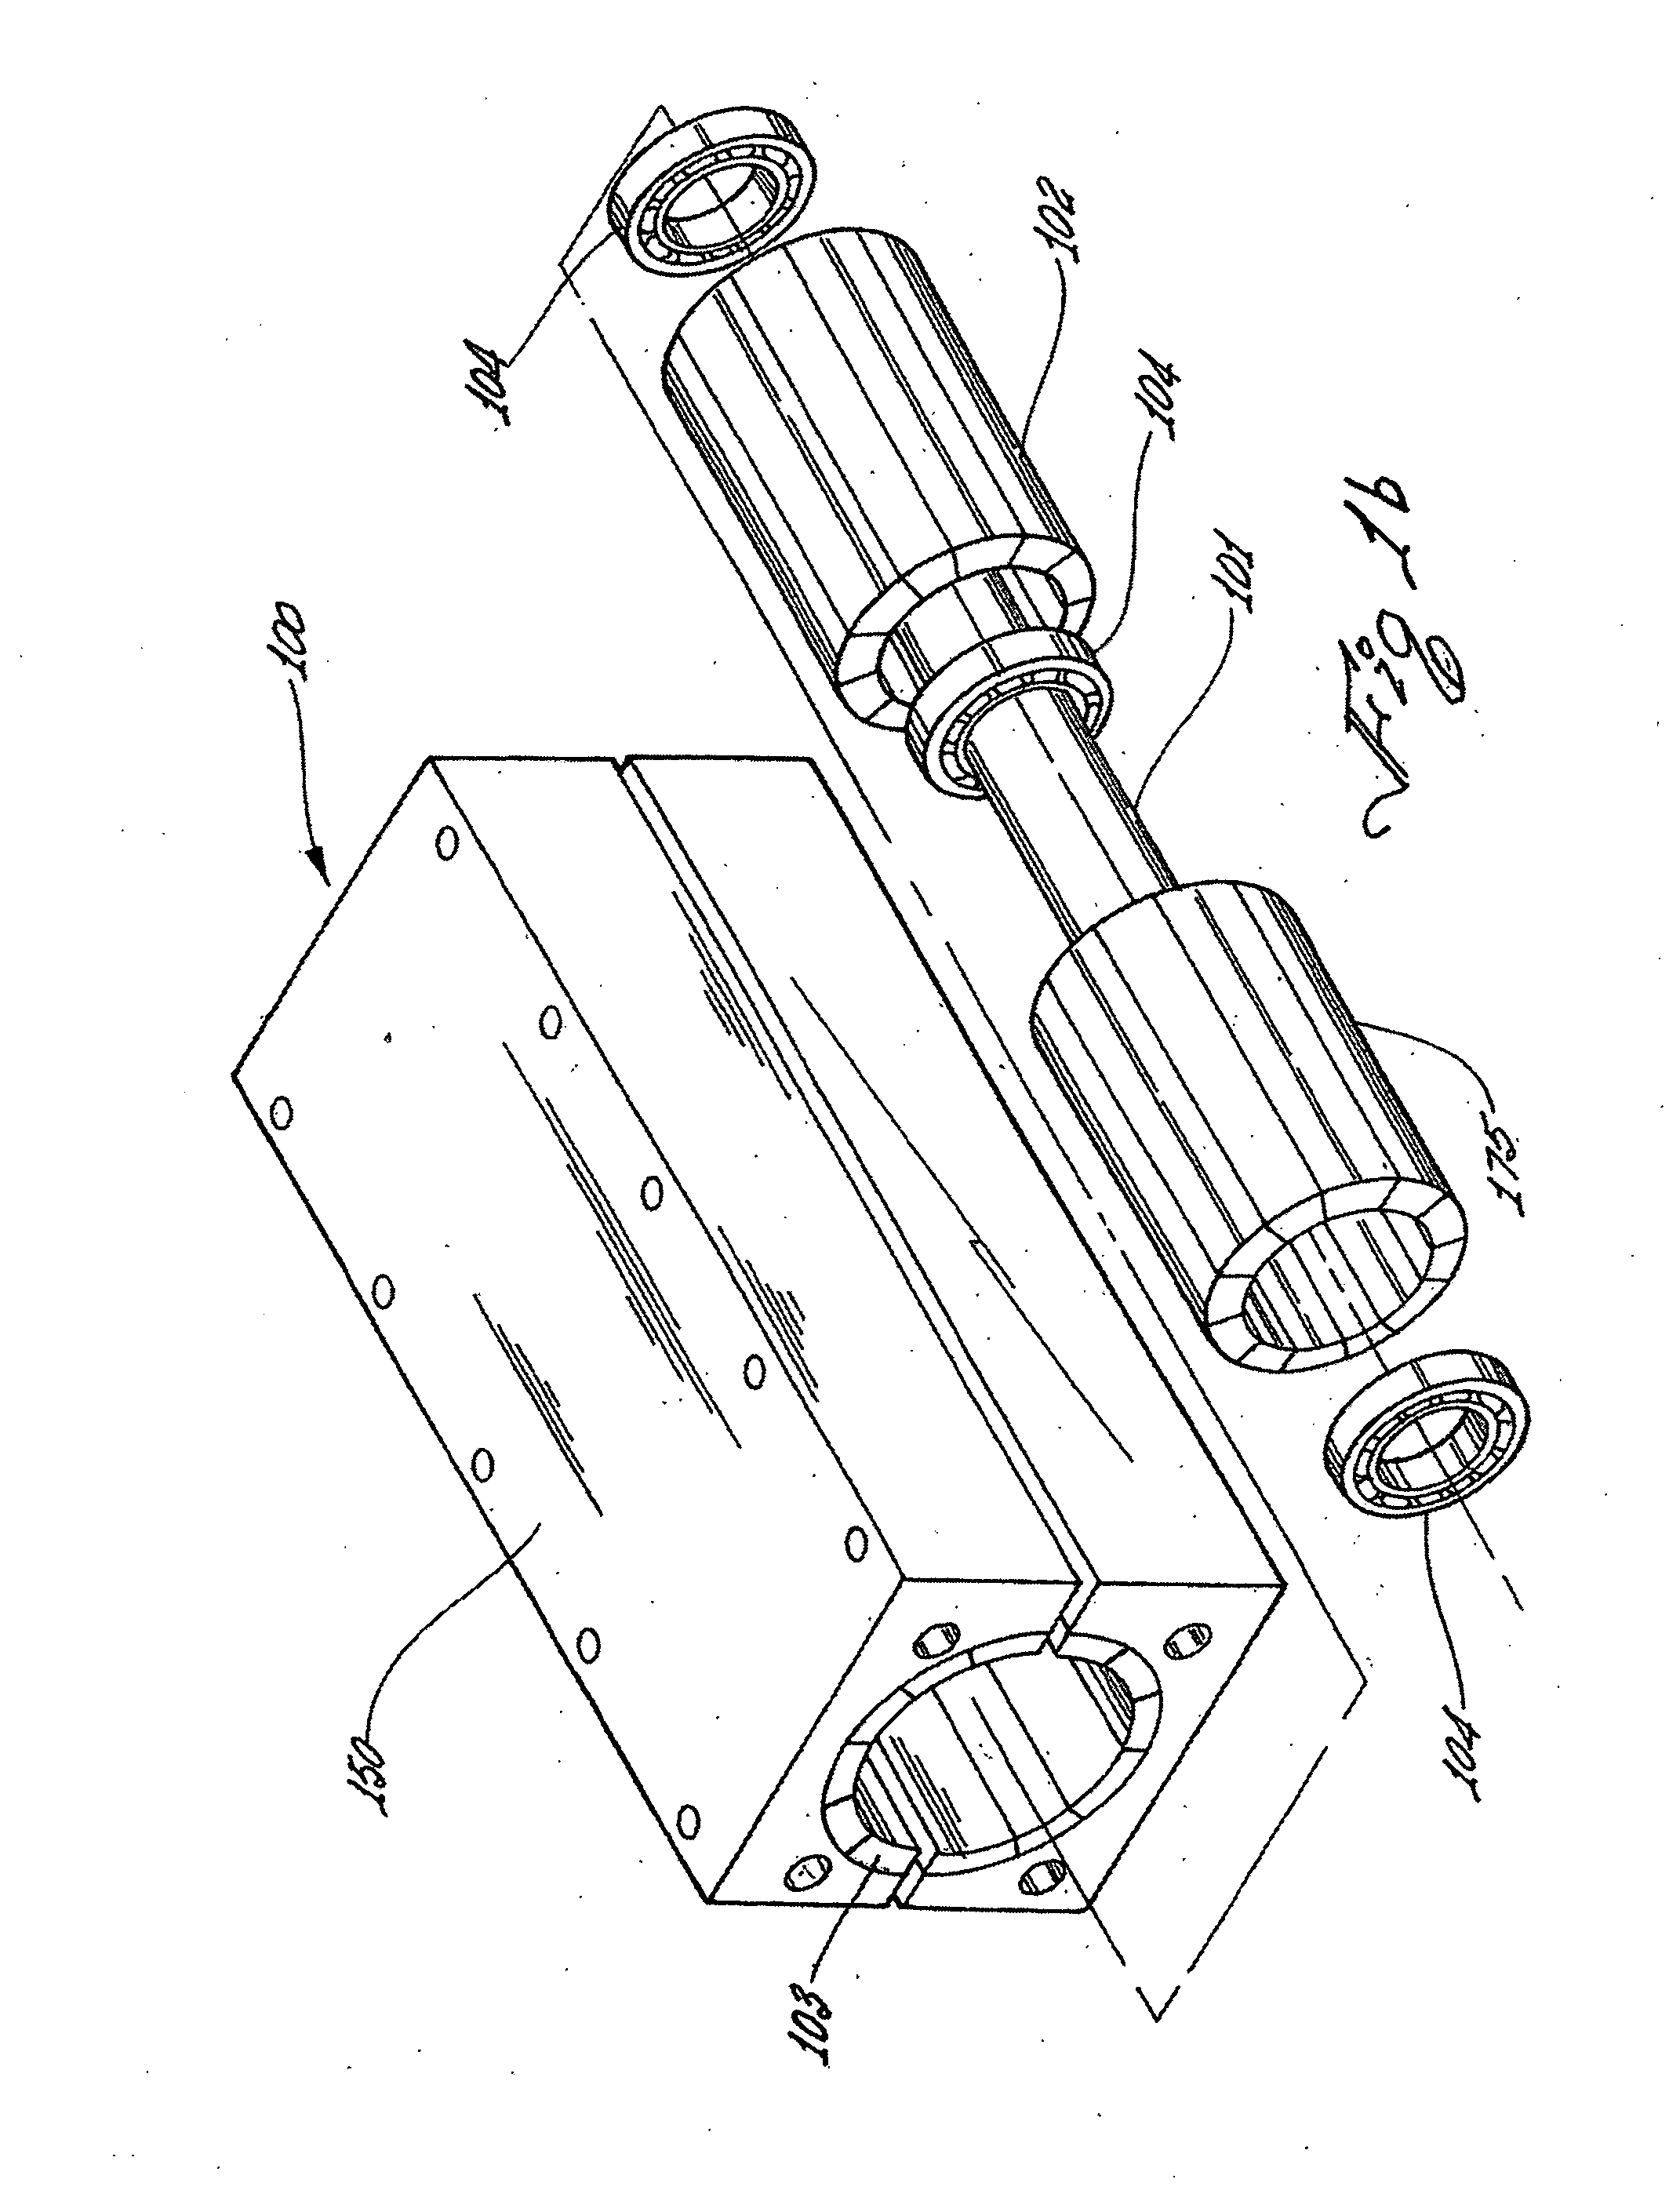 Motorized axle for use with environmentally friendly vehicles